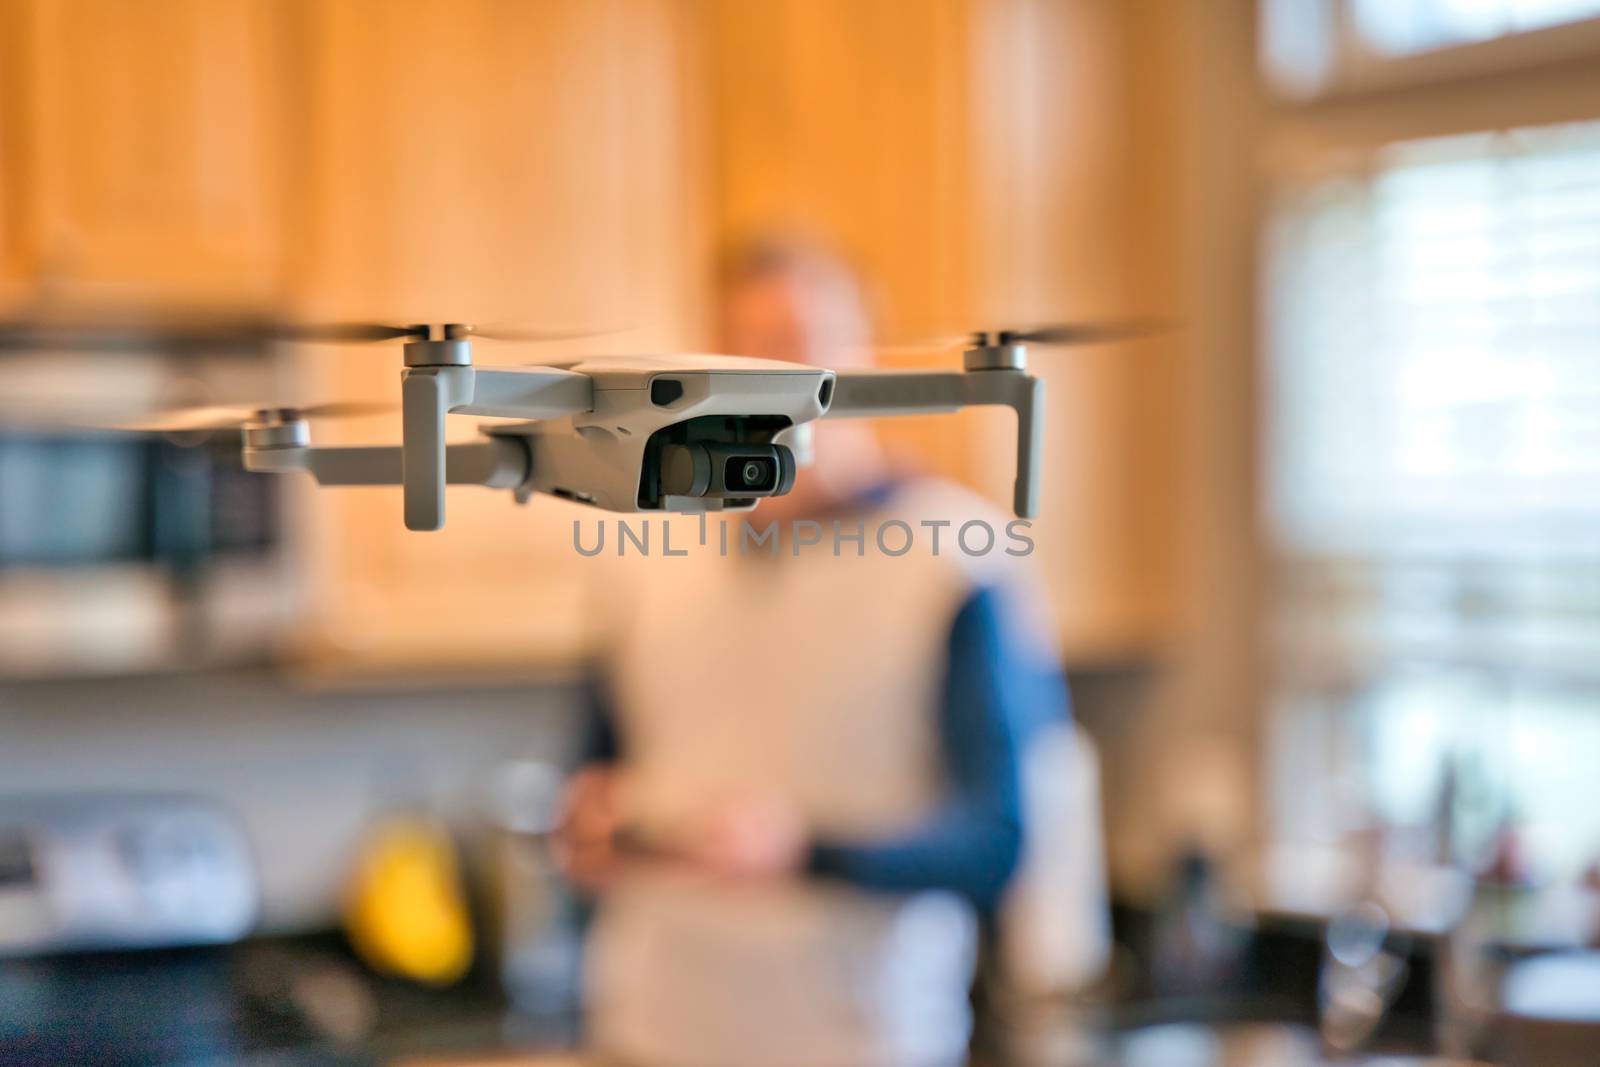 Drone flying indoors with kitchen and pilot visible in background. Amateur drone flying inside for practice. Pilot with remote visible.